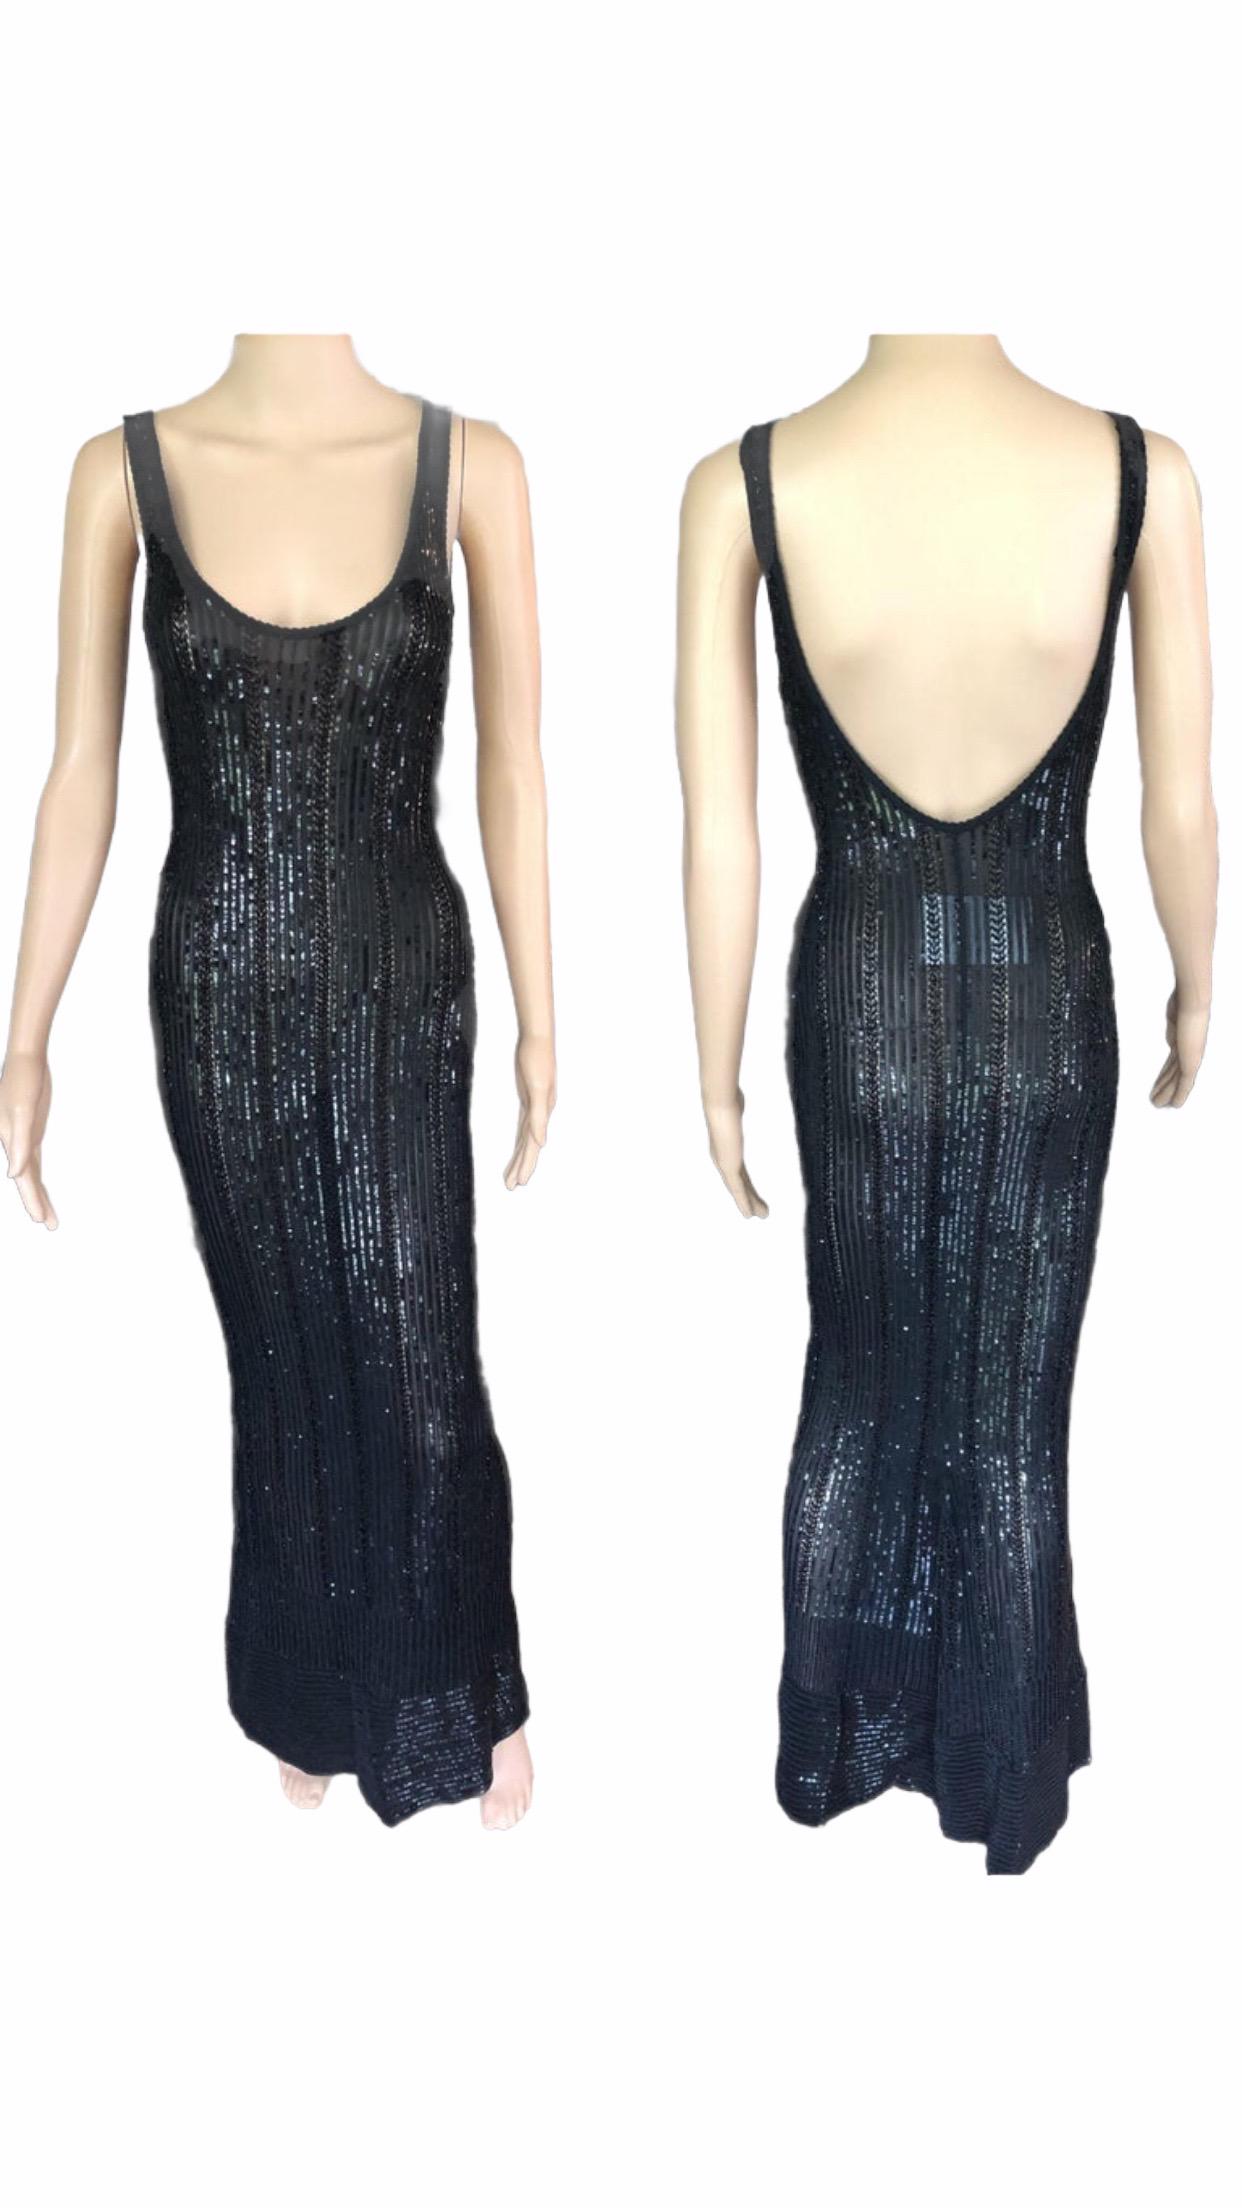 Azzedine Alaia Vintage S/S 1996 Embellished Sequin Black Evening Dress Gown Size M

Black vintage Alaïa sleeveless beaded gown with bead and sequin embellishments throughout and scoop neck.

All Eyes on Alaïa

For the last half-century, the world’s